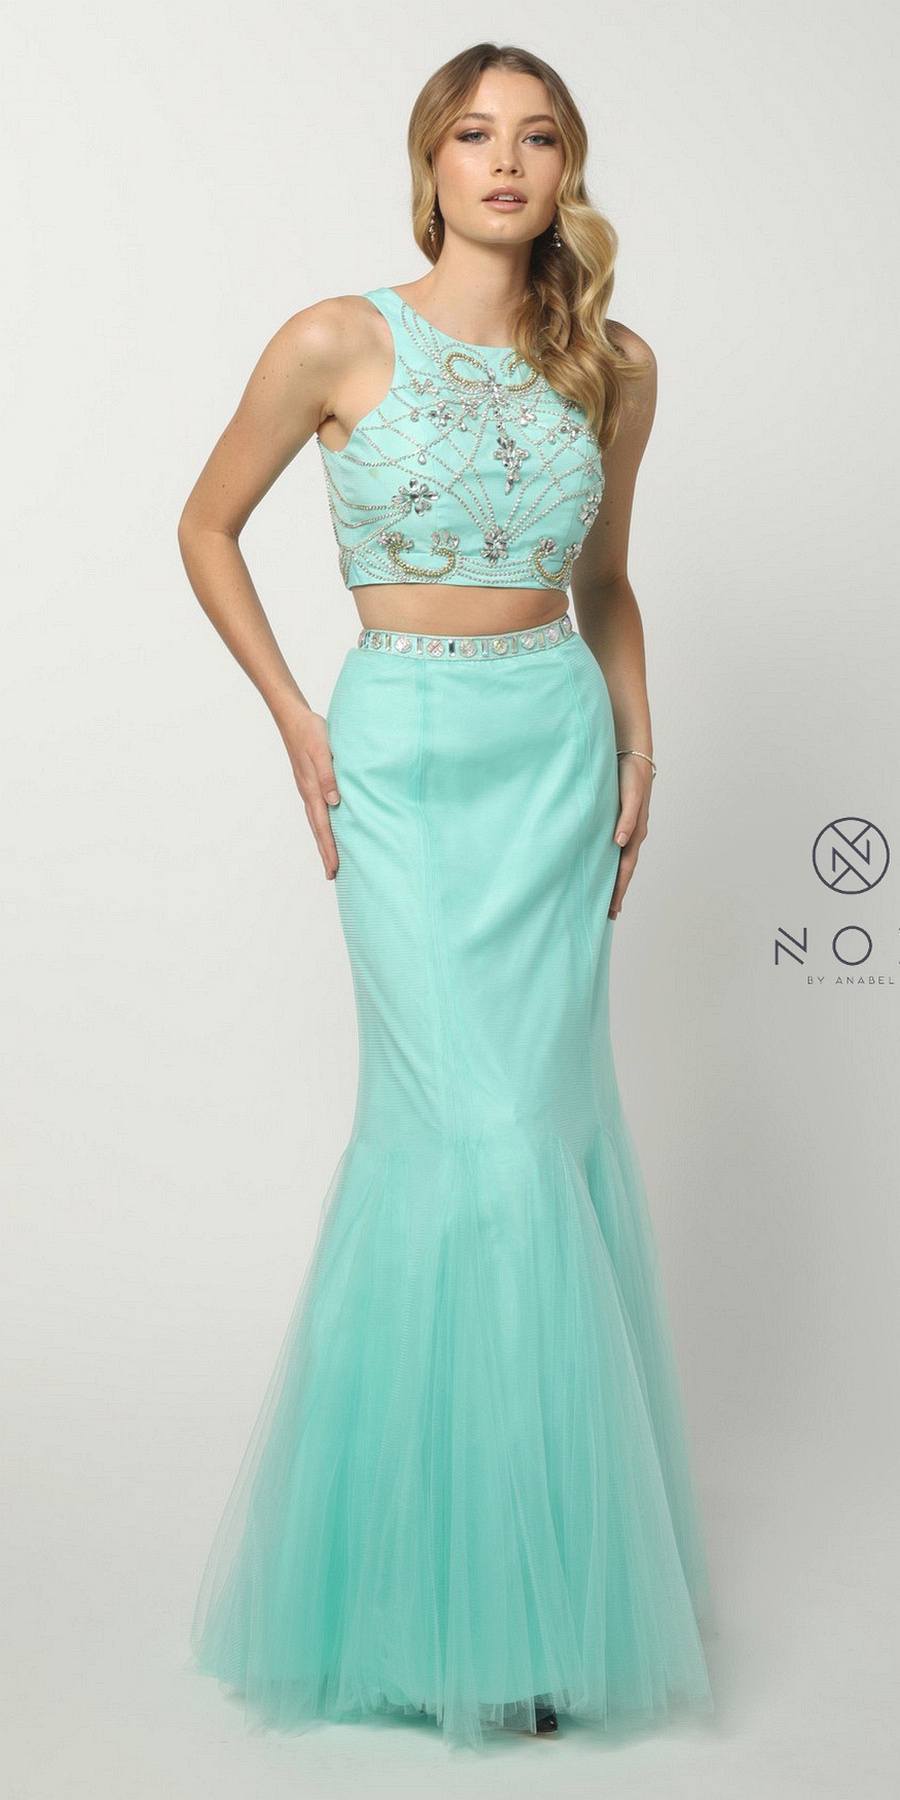 Nox Anabel 8156 Hot Trend Two Piece Prom Gown Mint Green Mermaid Tulle Skirt